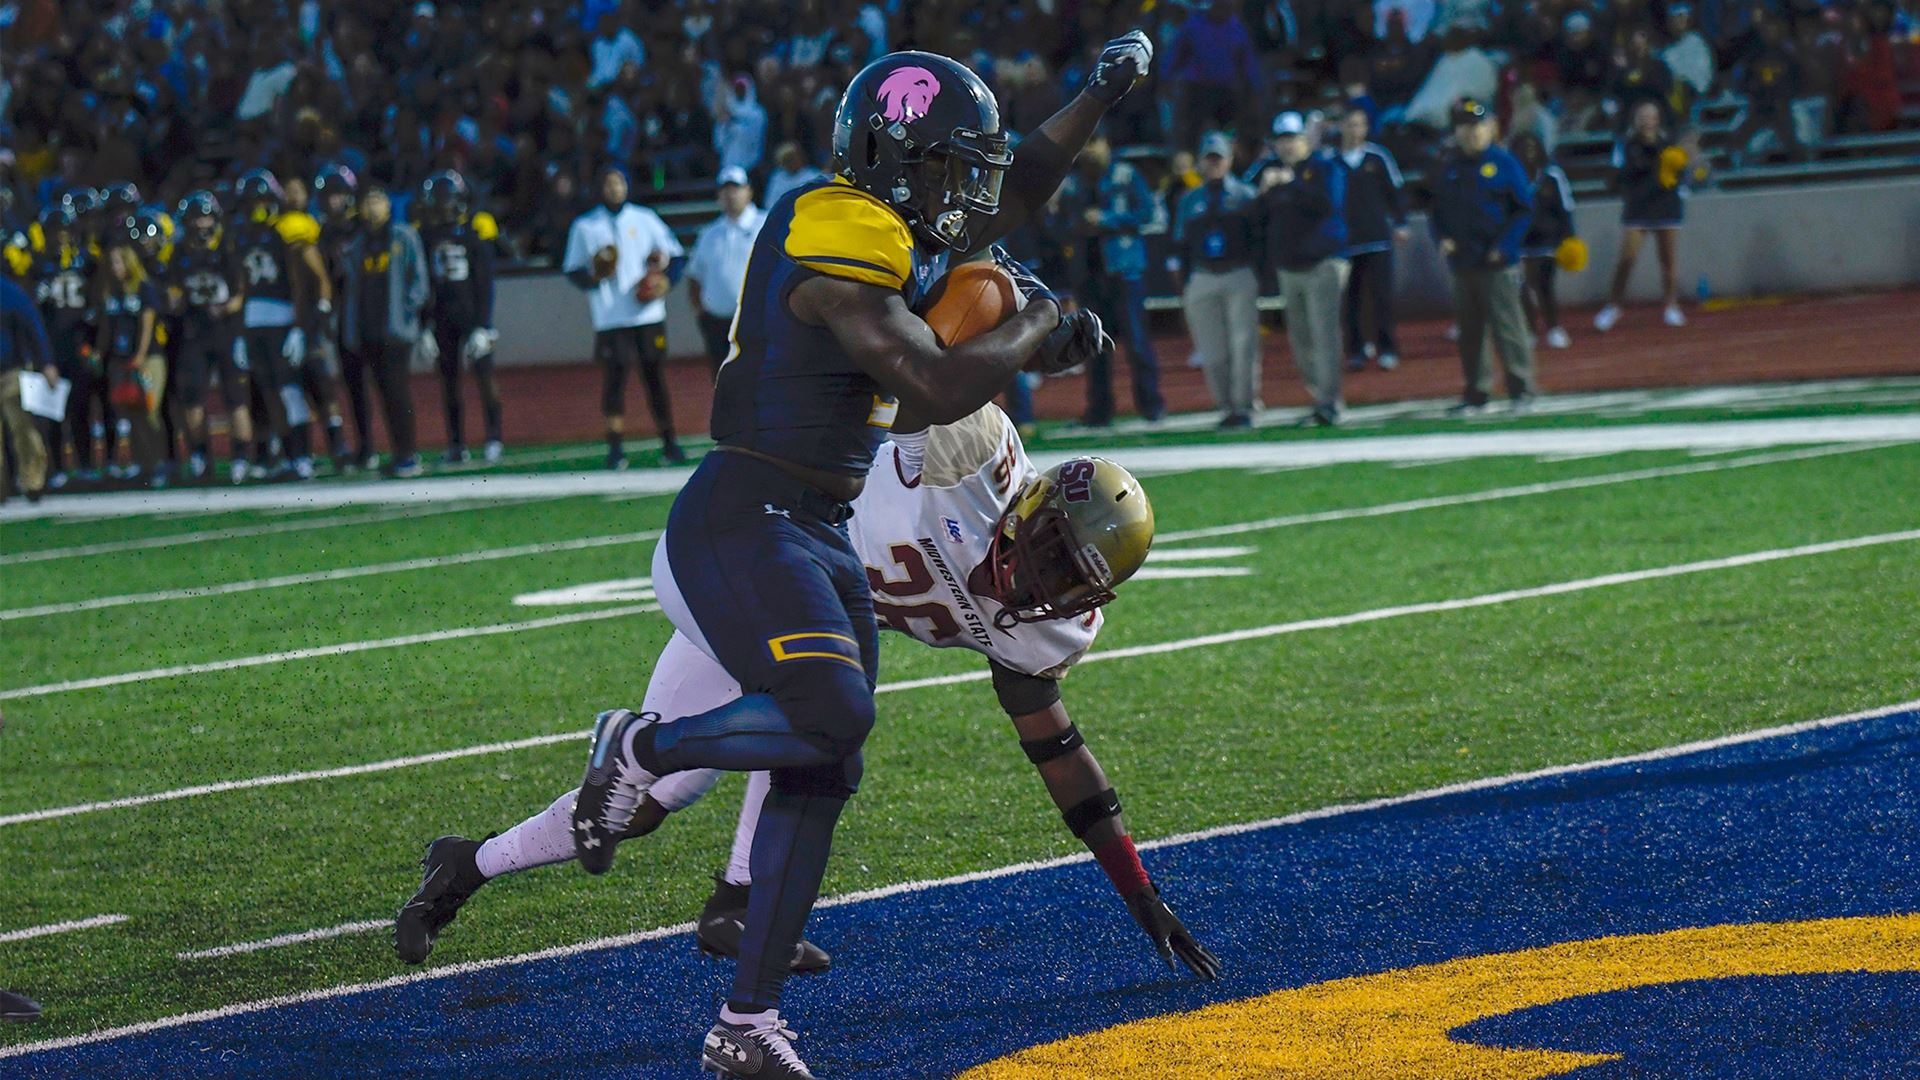 TEXAS A&M-COMMERCE FOOTBALL: No. 20 Lions Power to 54-28 Win Over Midwestern State in Division II Showcase